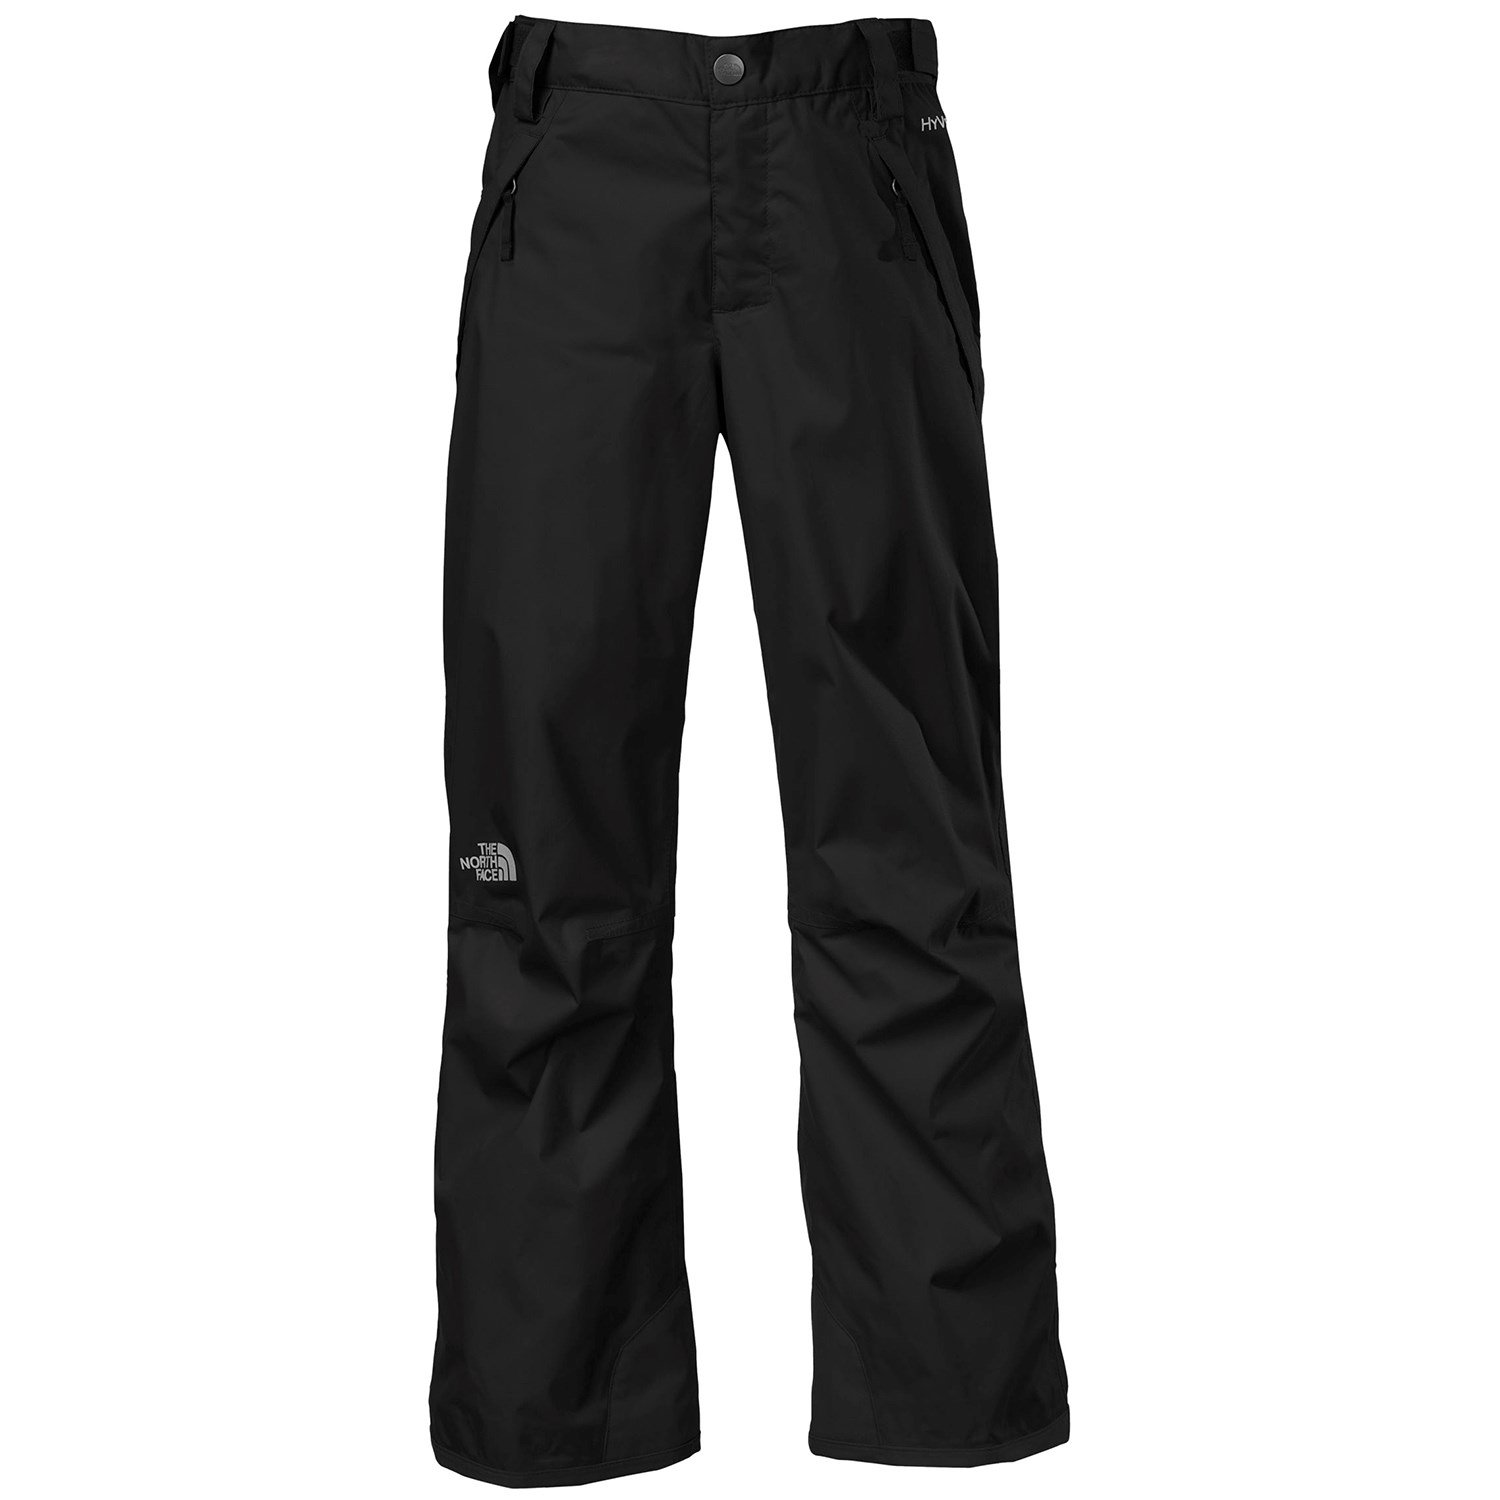 https://images.evo.com/imgp/zoom/101416/437298/the-north-face-snowquest-triclimate-pants-girls--front.jpg